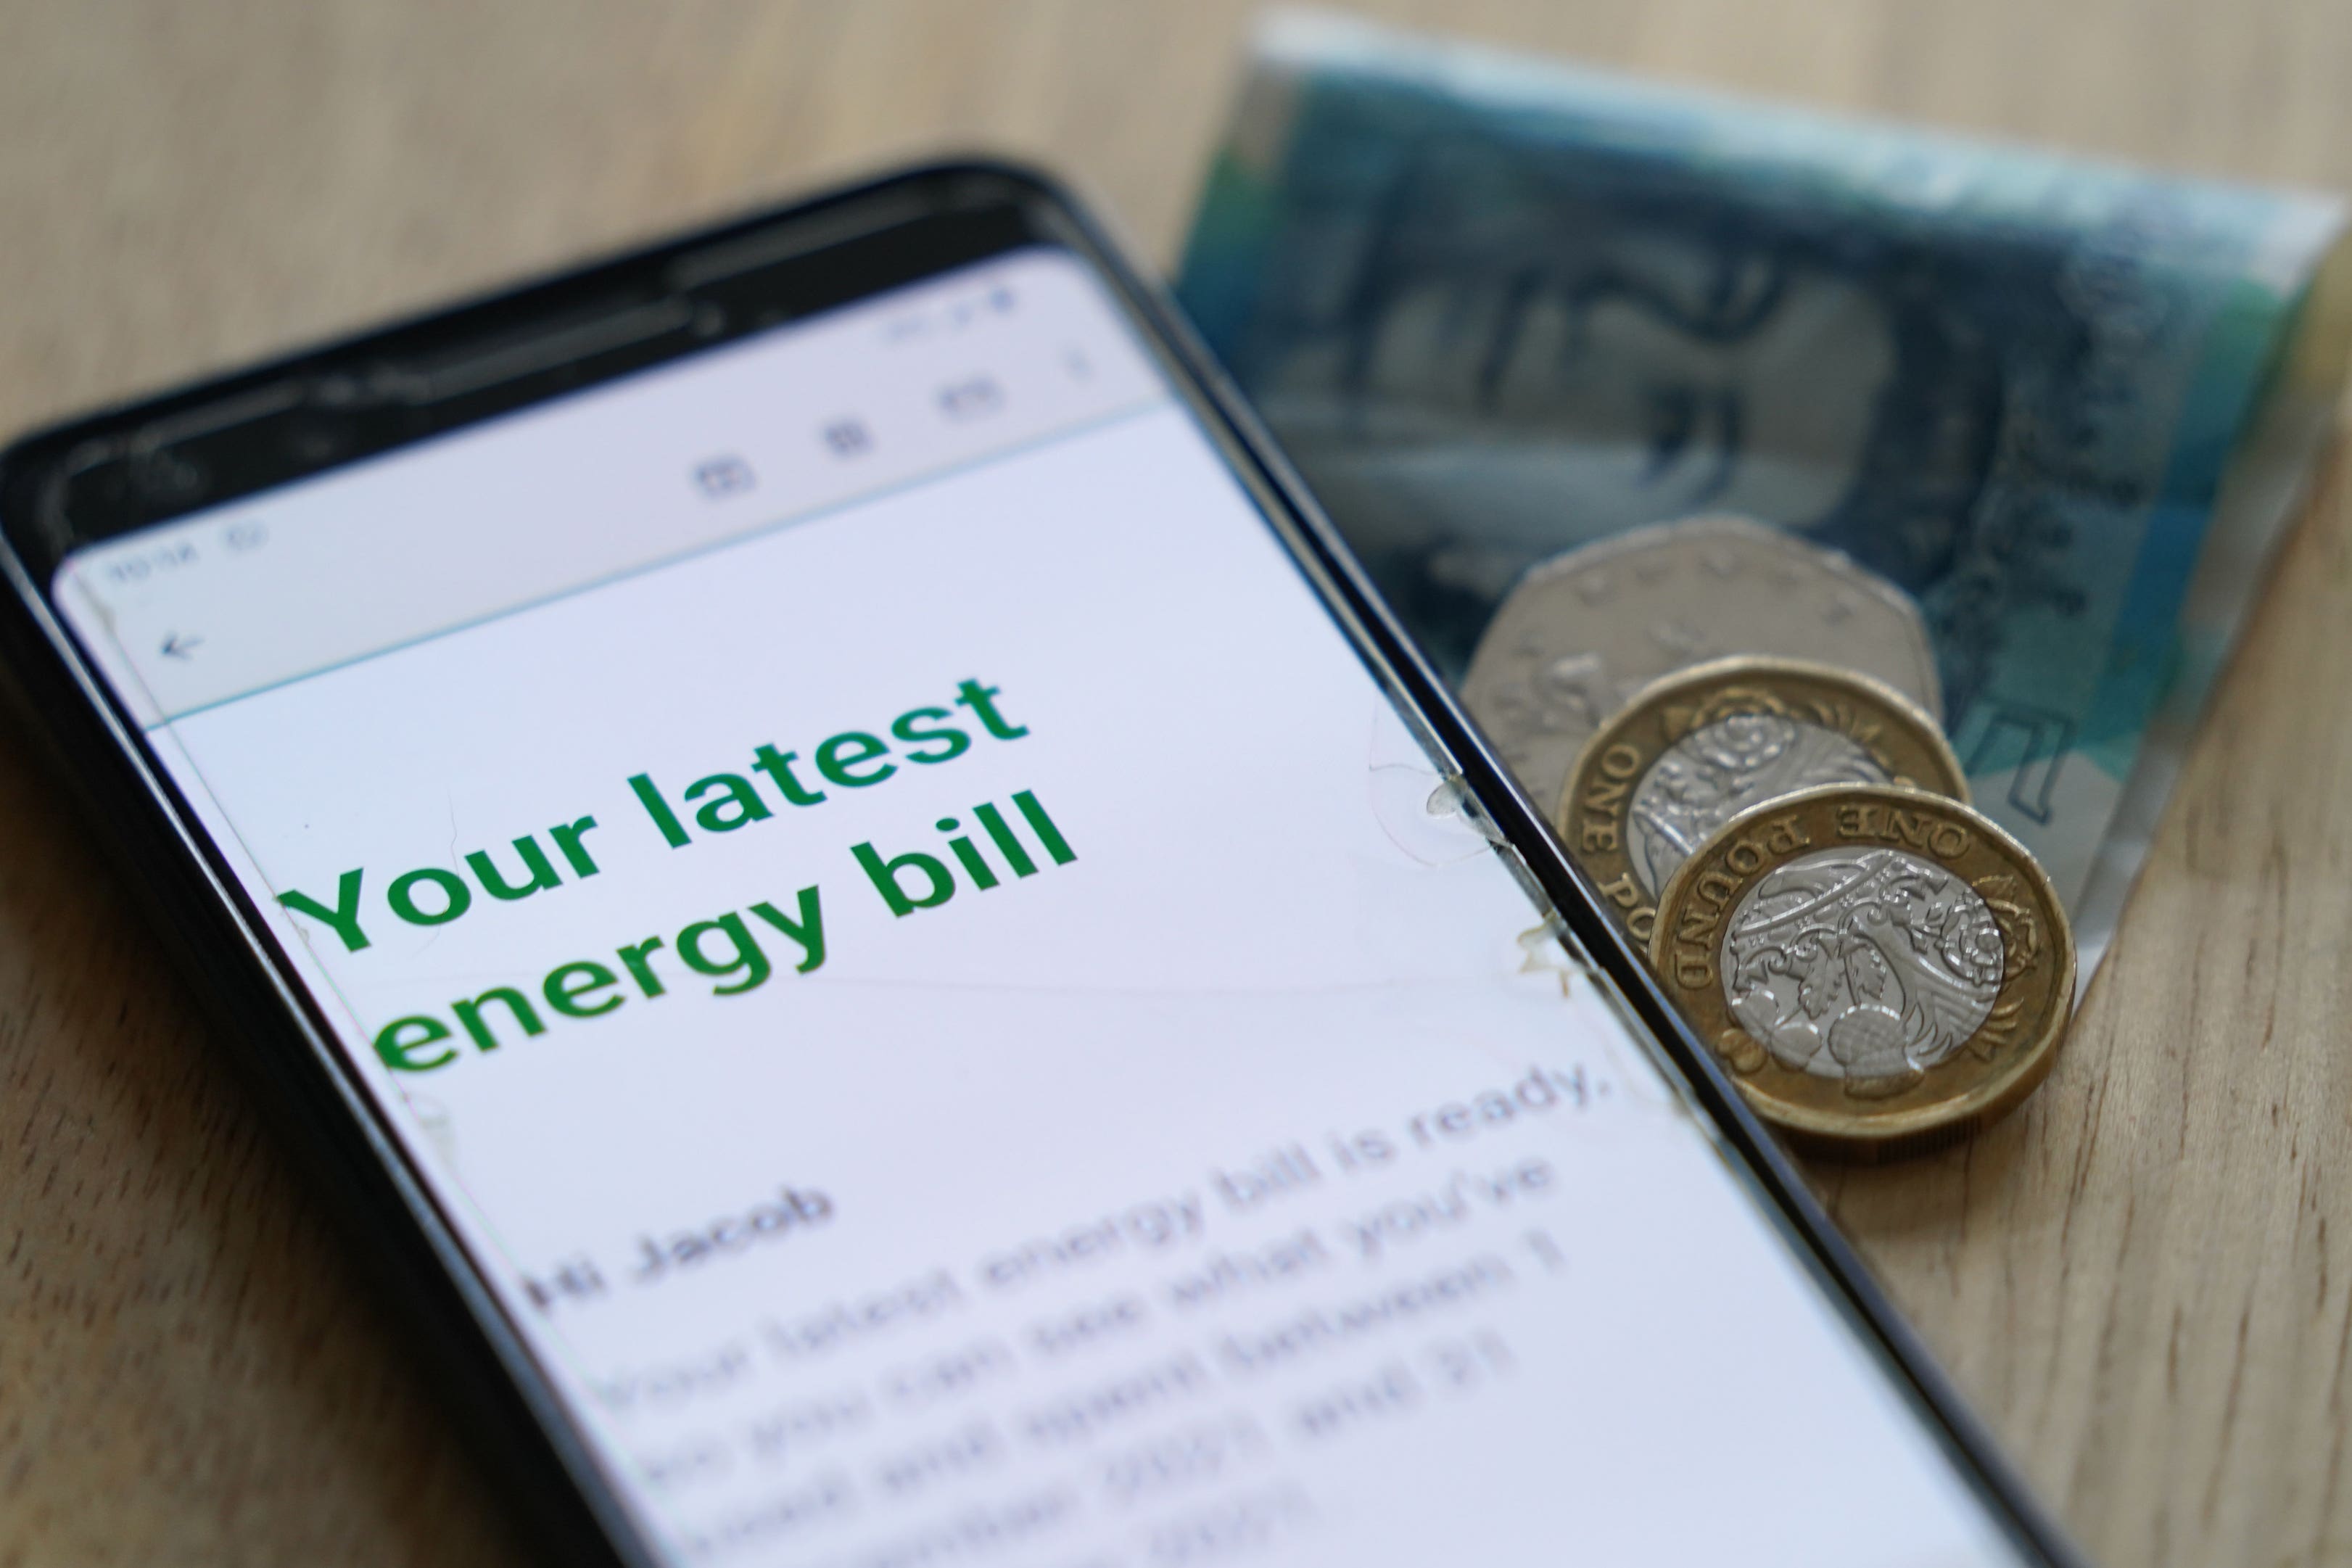 Ofgem is lowering its energy price cap – the amount suppliers are able to charge – from the current £4,279 per year to £3,280 for the average household, effective from April 1, it has announced